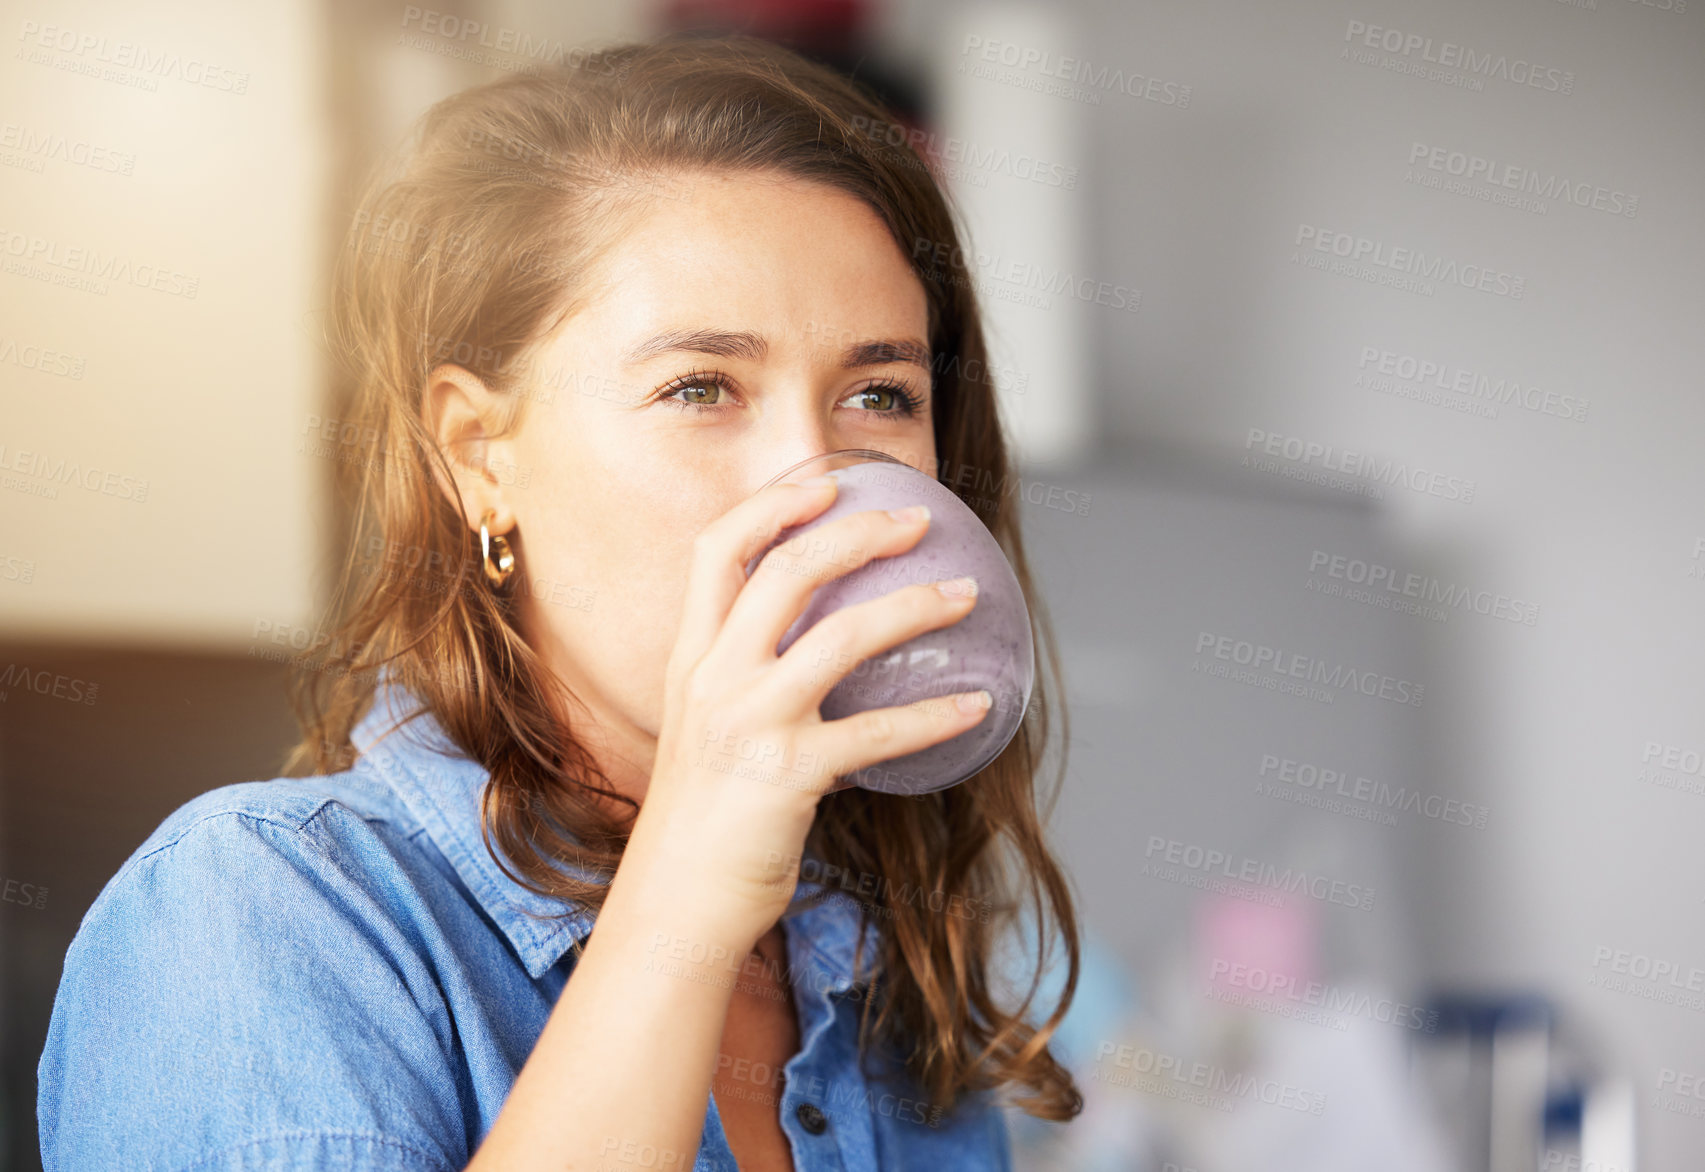 Buy stock photo Shot of a young female drinking a smoothy at home